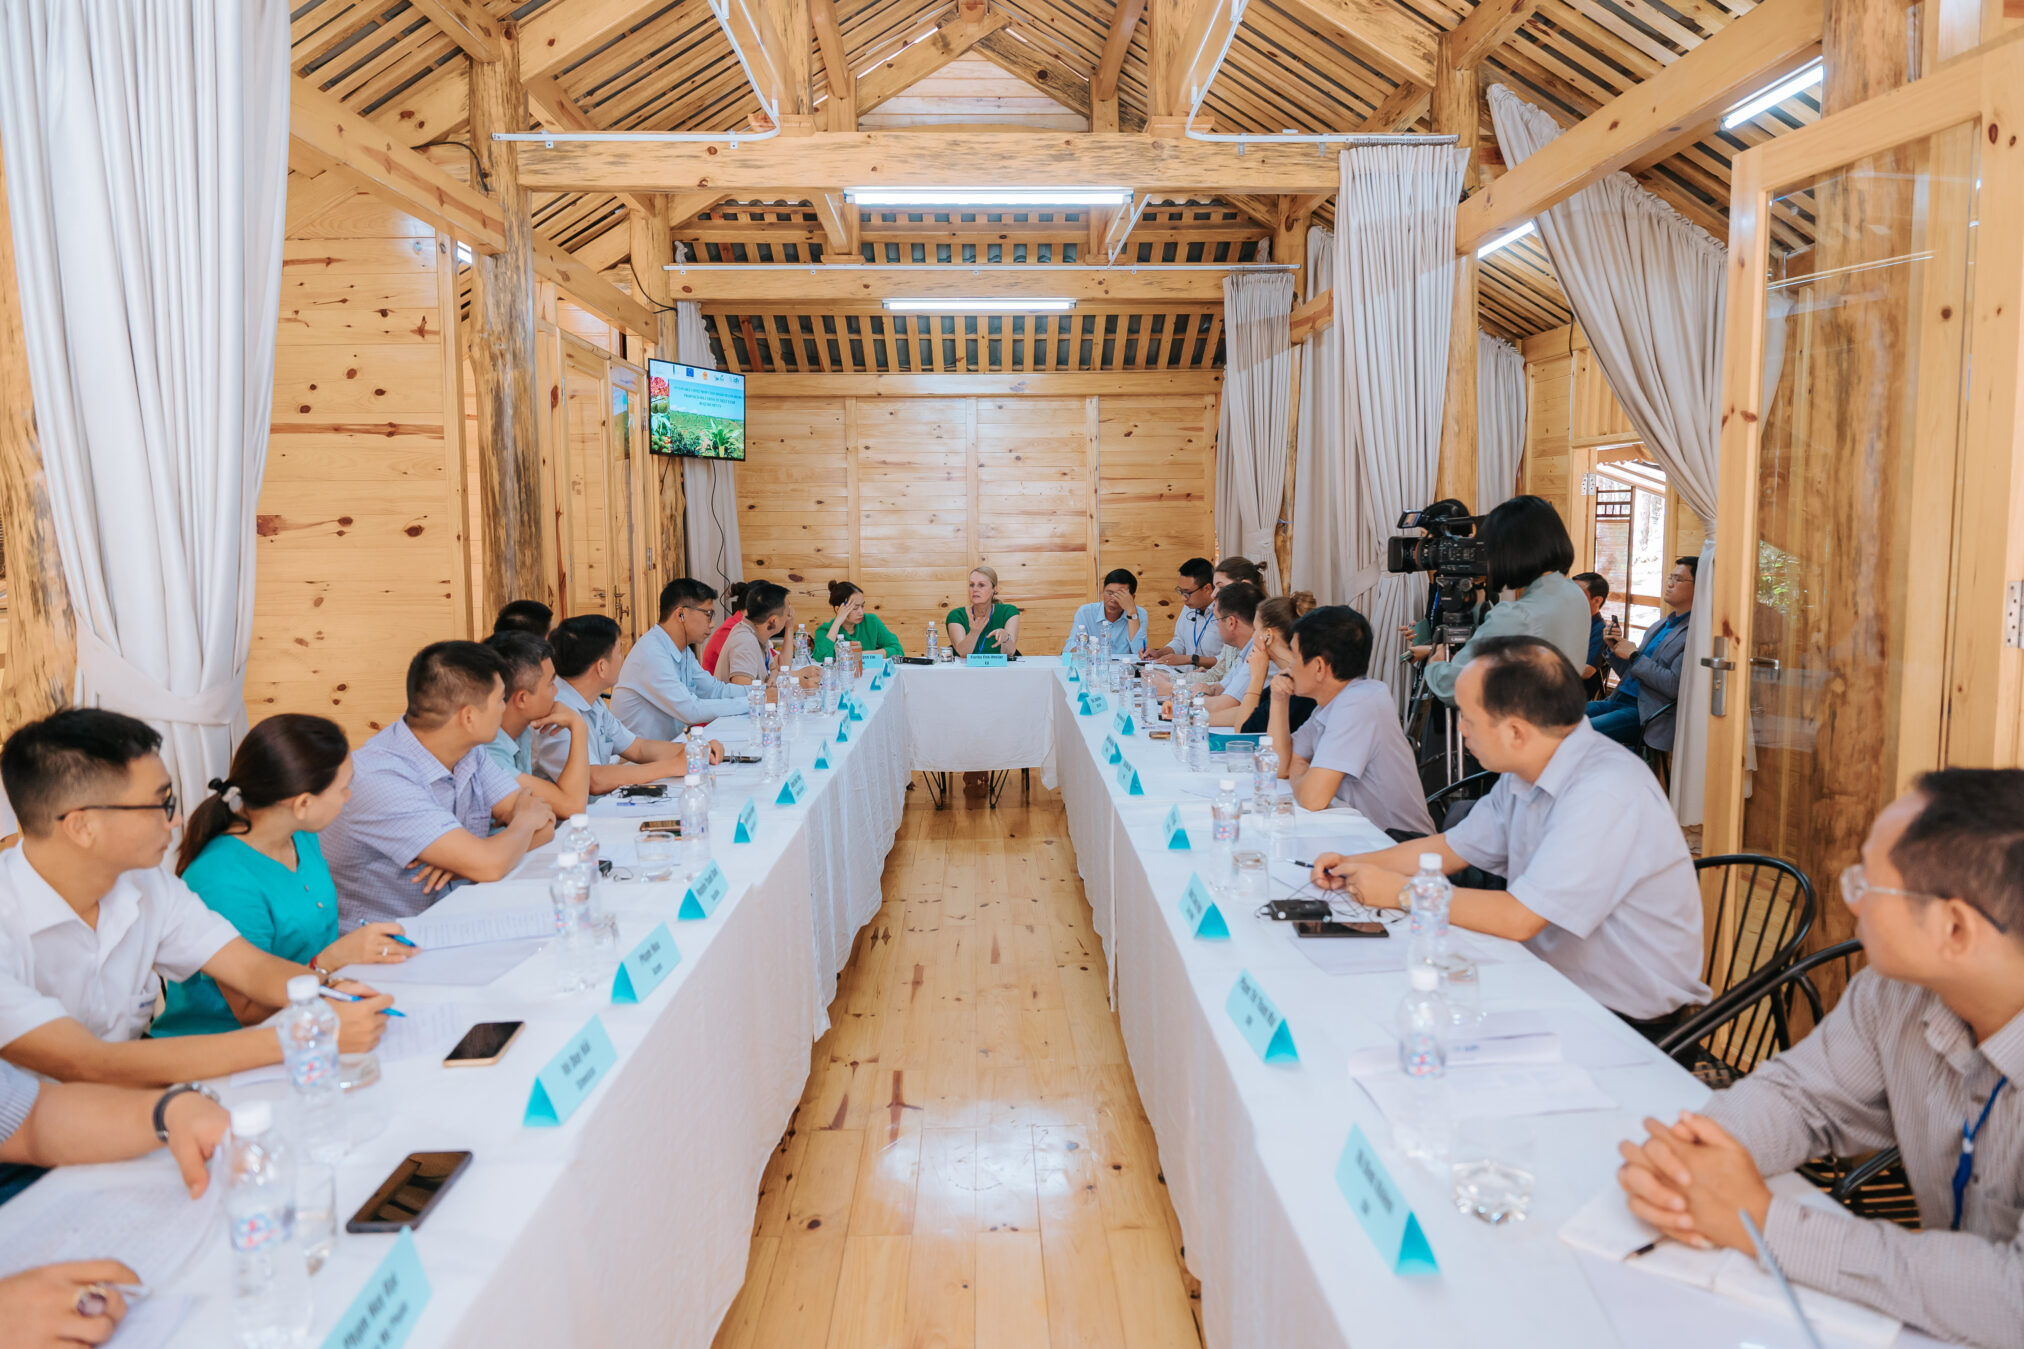 Discussing the Implications of the EUDR on the Coffee Sector in Vietnam